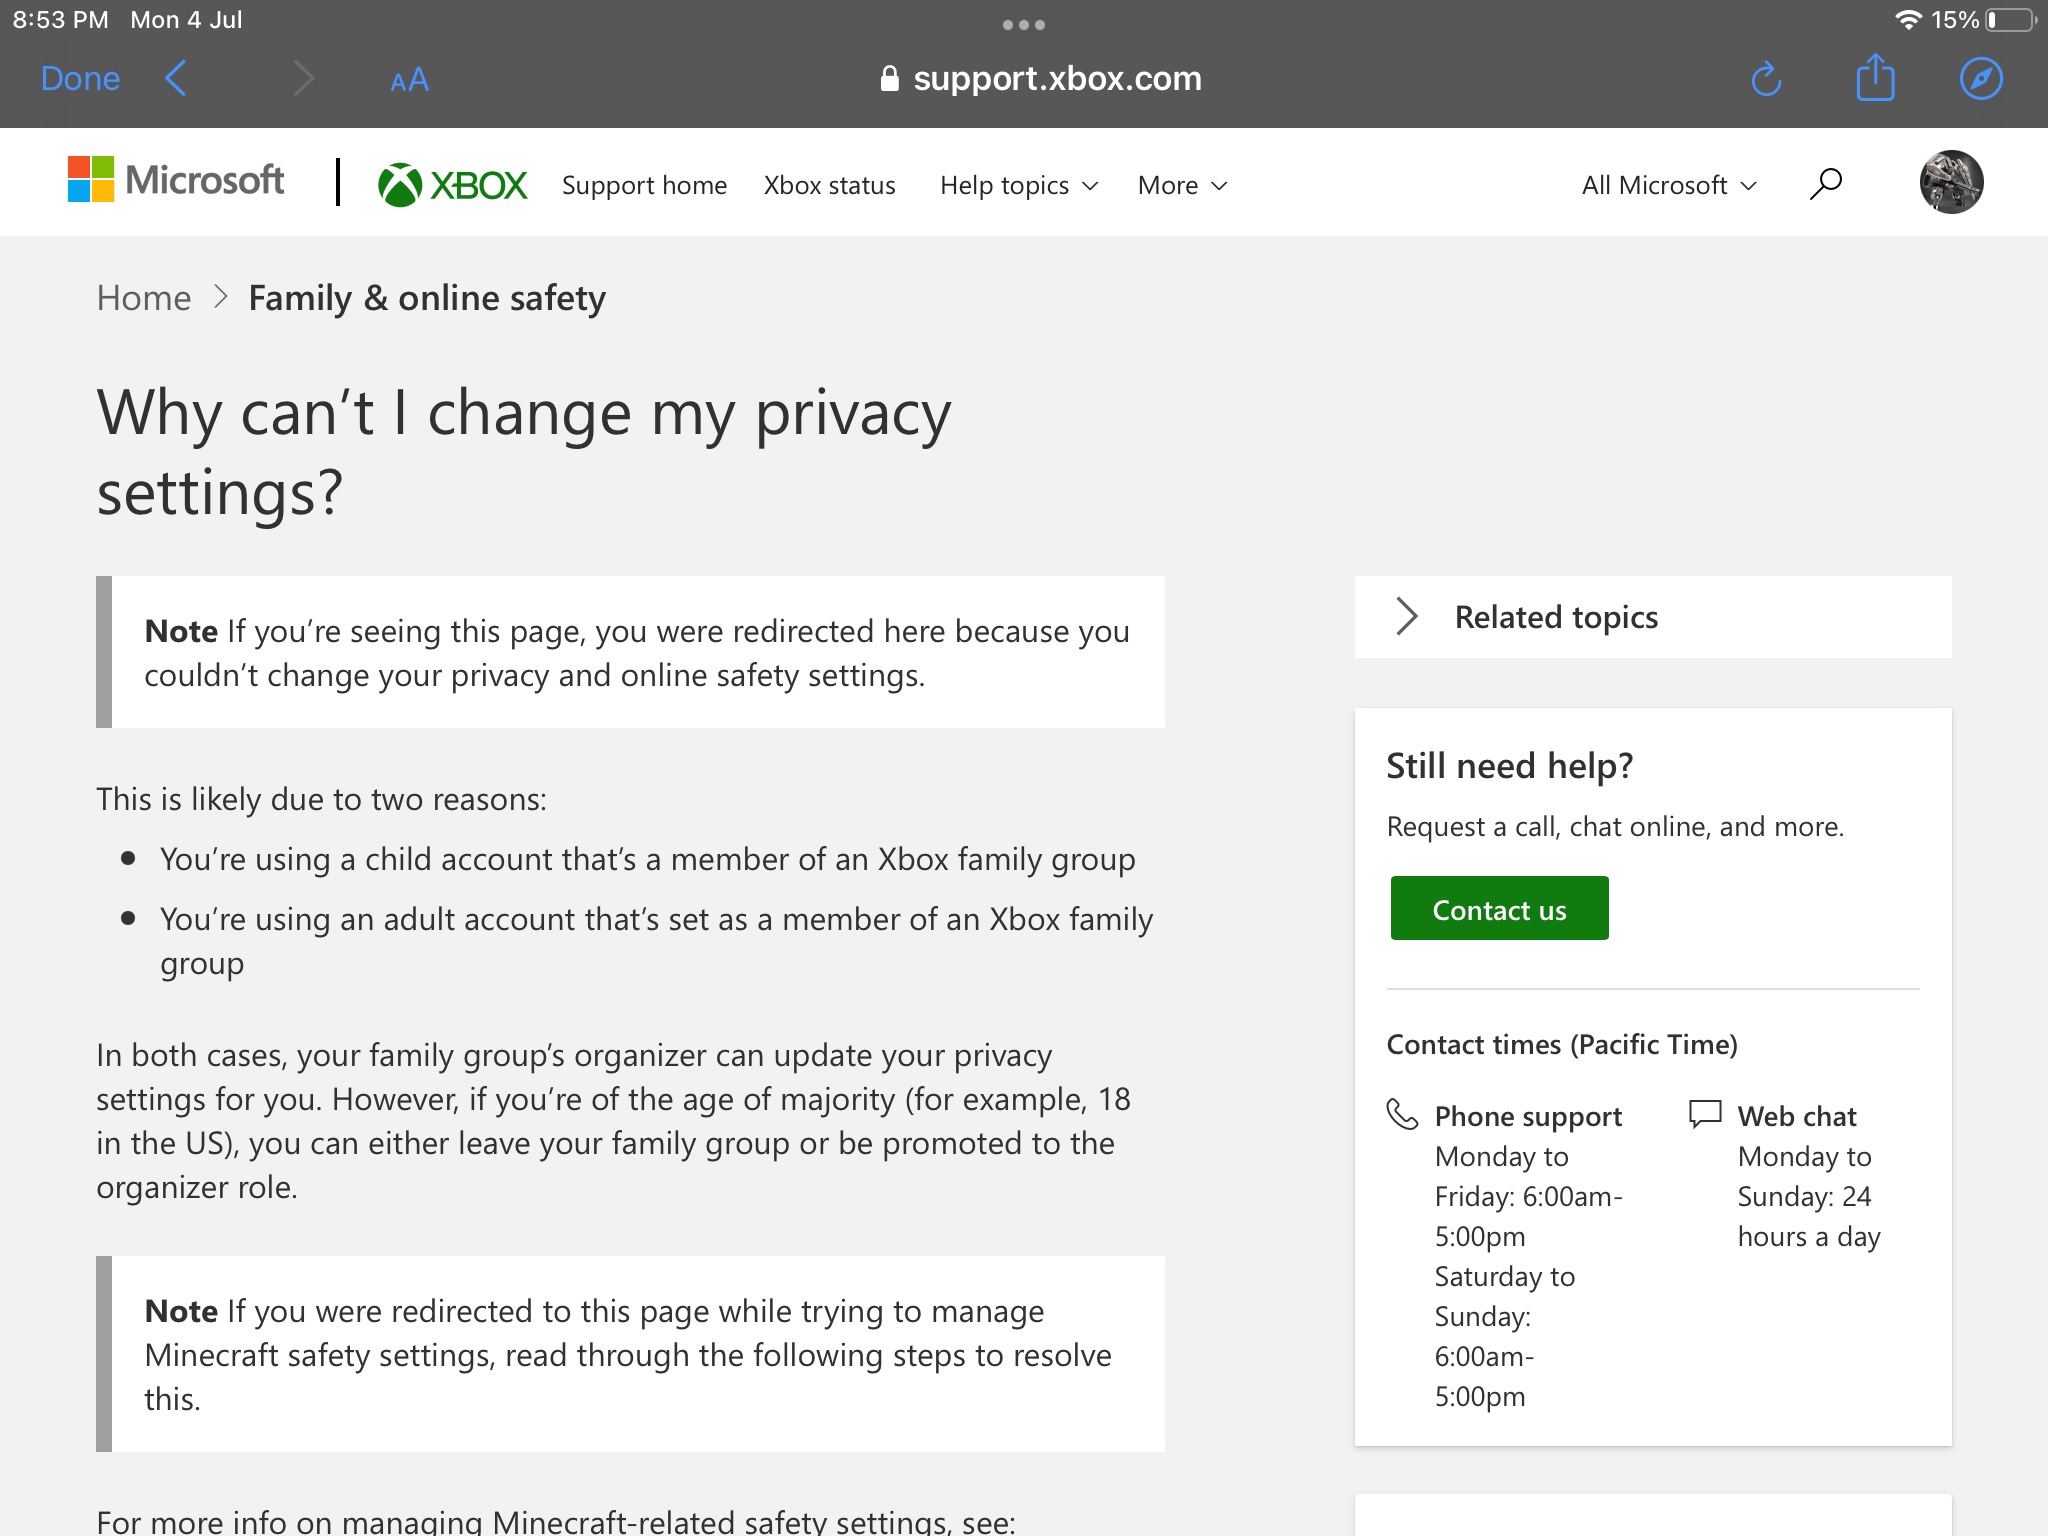 My cloud gaming won't let me sign in. And just loads, but never loads -  Microsoft Community